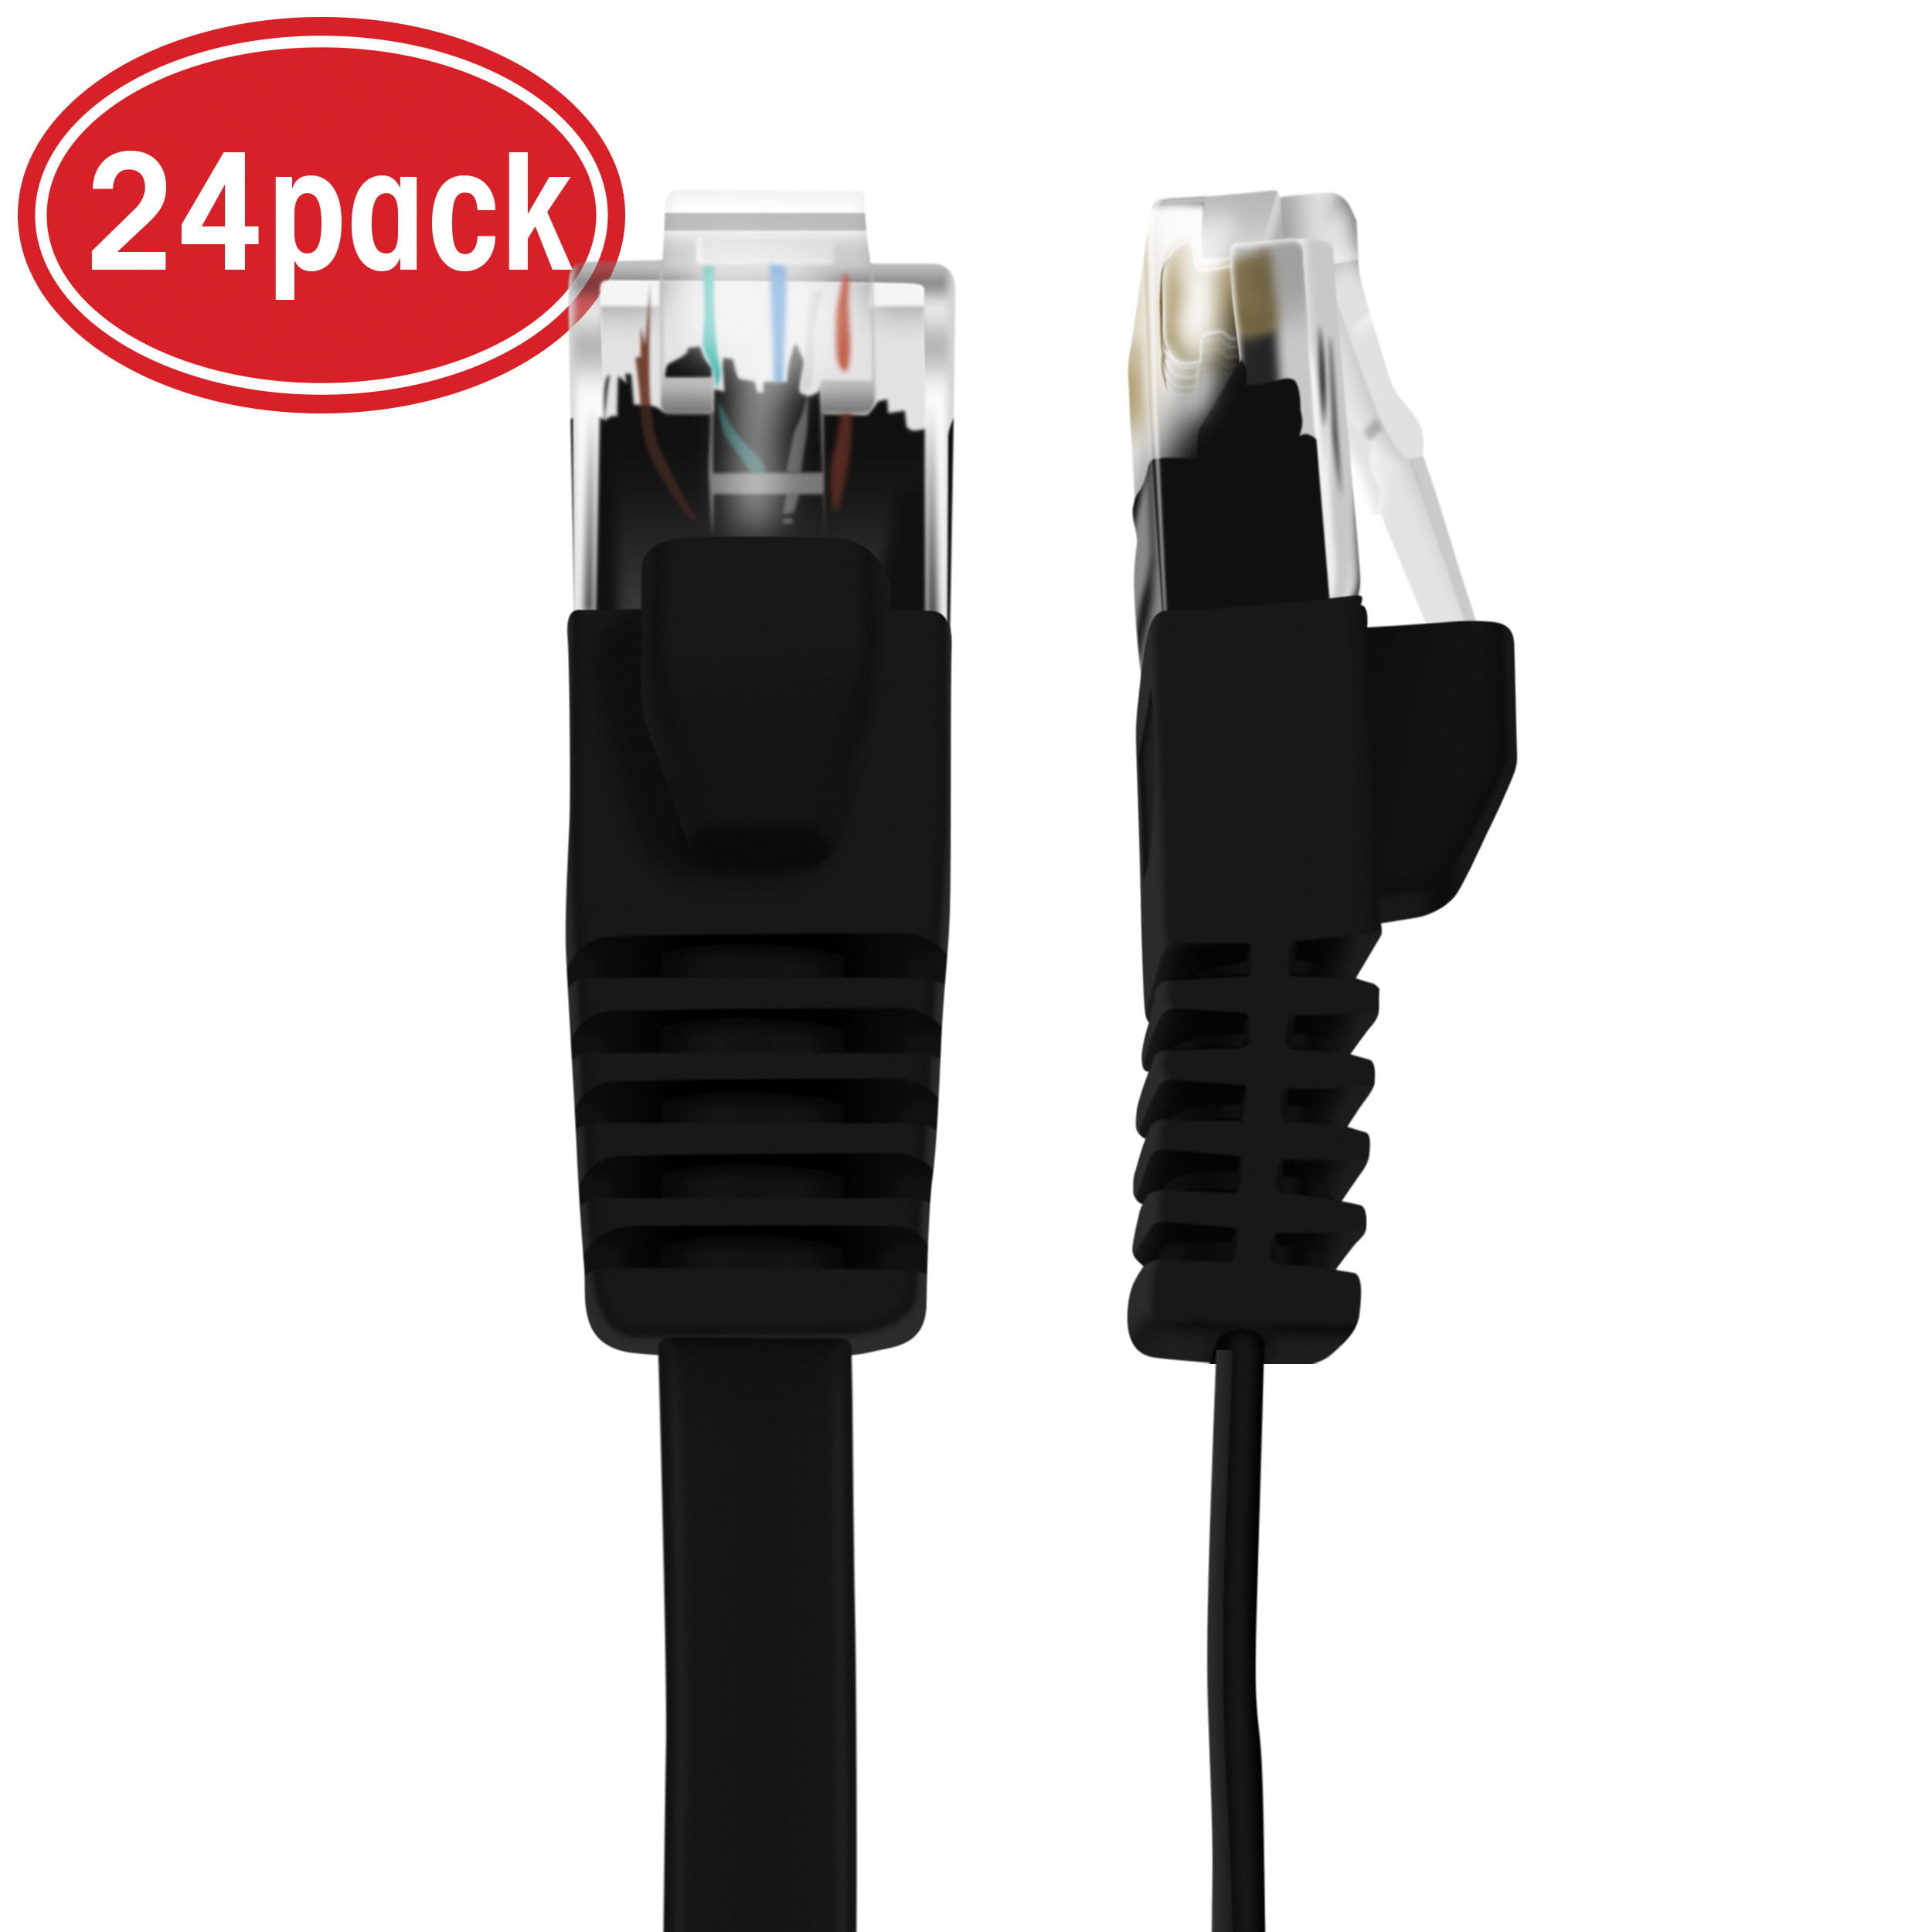 Compatible with 24 48 Port Switch POE Rackmount 24port Gigabit Black Cat 6 Ethernet Cable Cat6 Snagless Patch 1 Foot Snagless RJ45 Computer LAN Network Cord GearIT 24-Pack